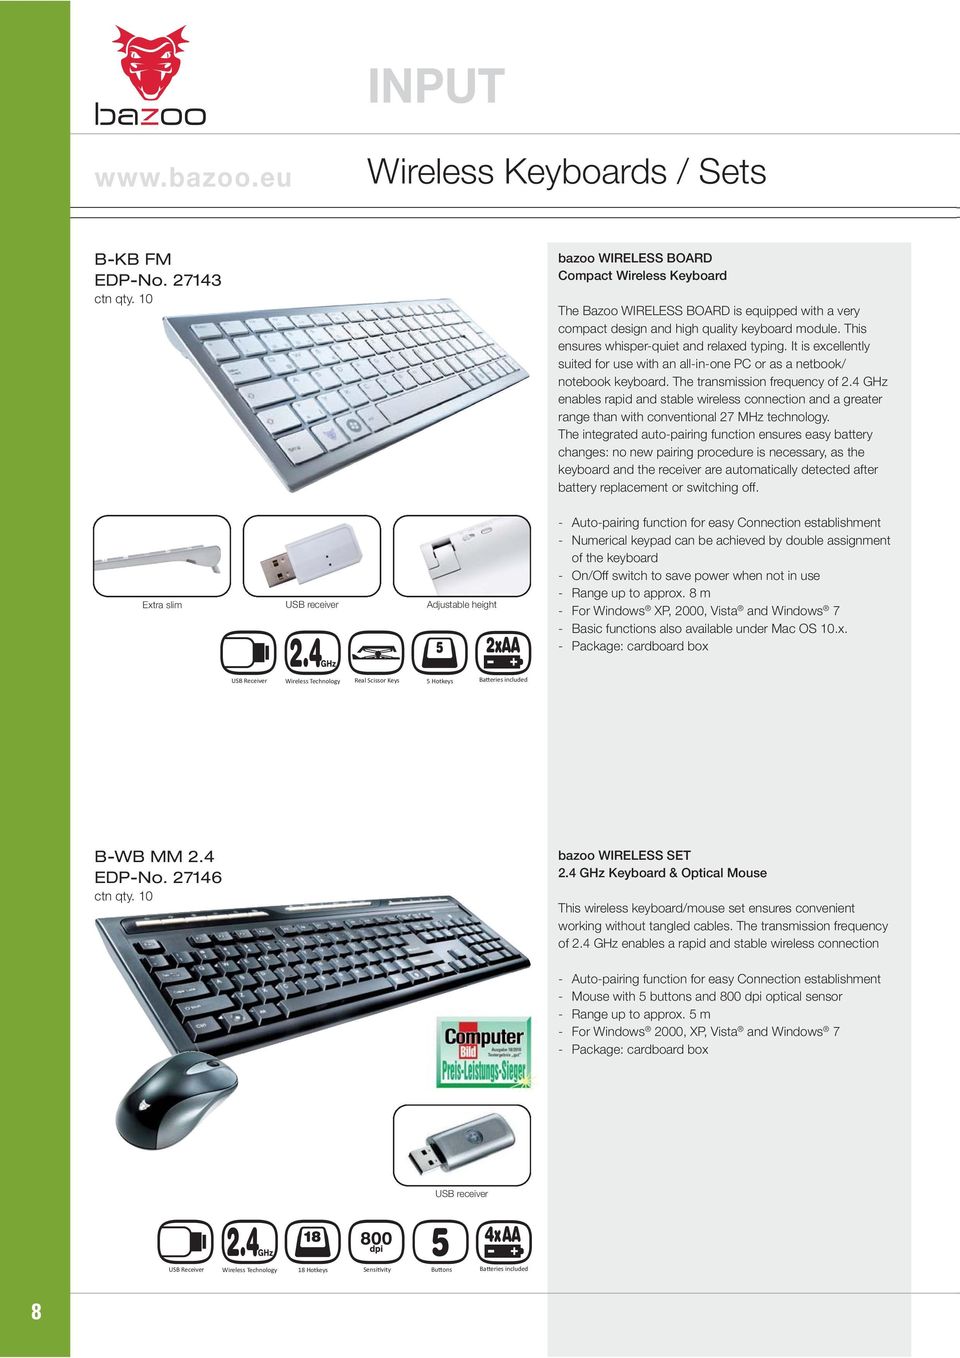 It is excellently suited for use with an all-in-one PC or as a netbook/ notebook keyboard. The transmission frequency of 2.